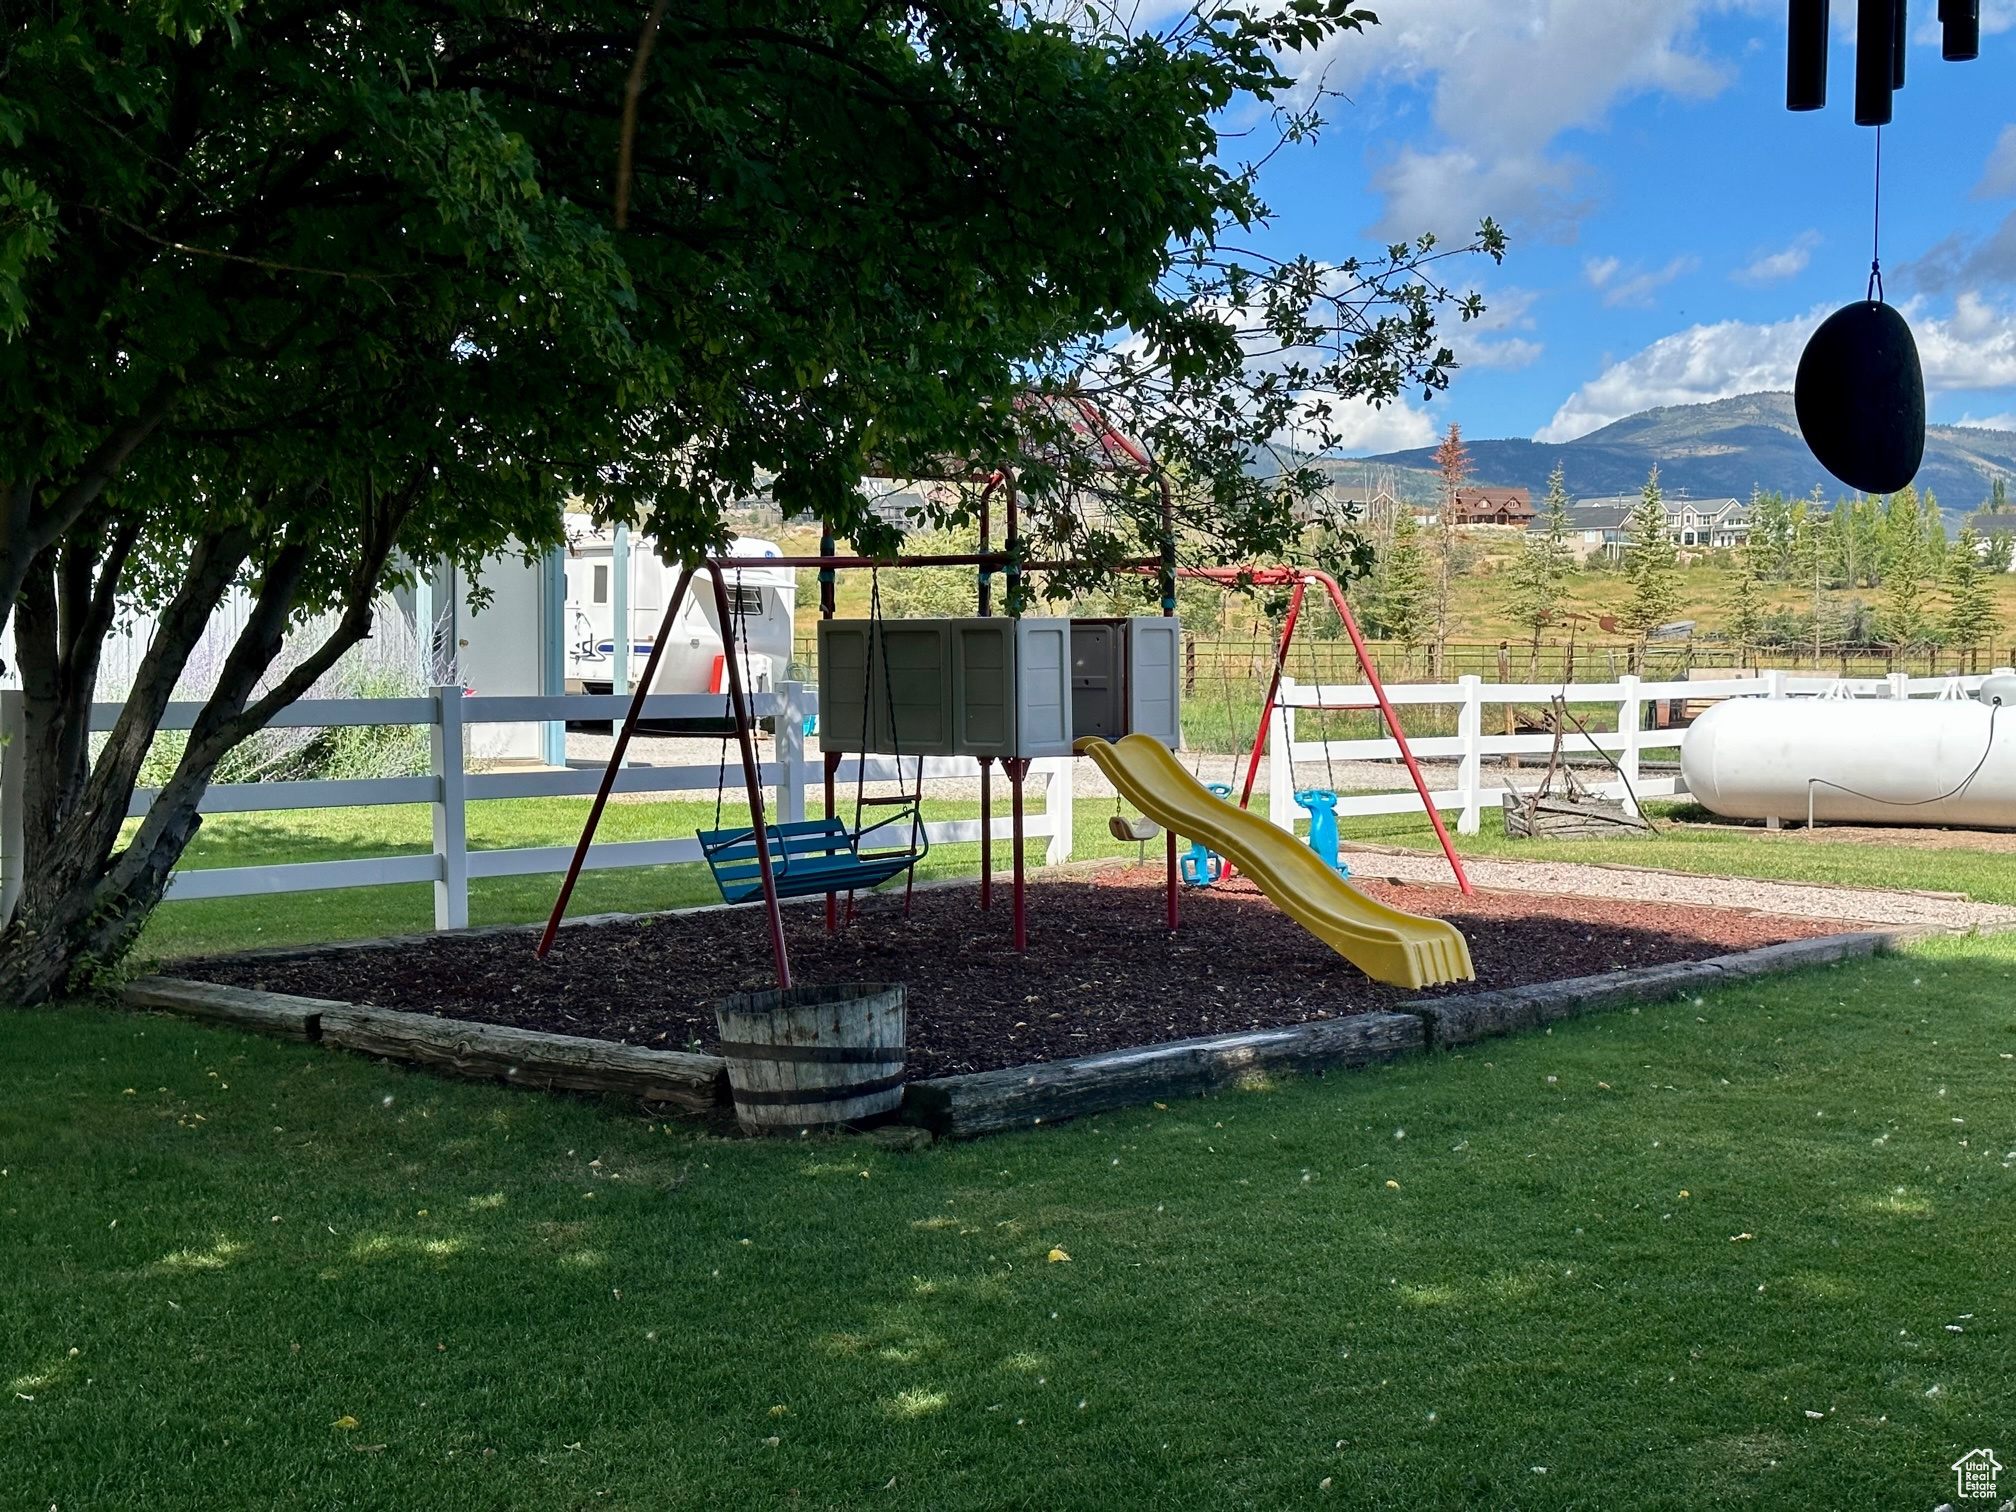 View of play area with a lawn and a mountain view